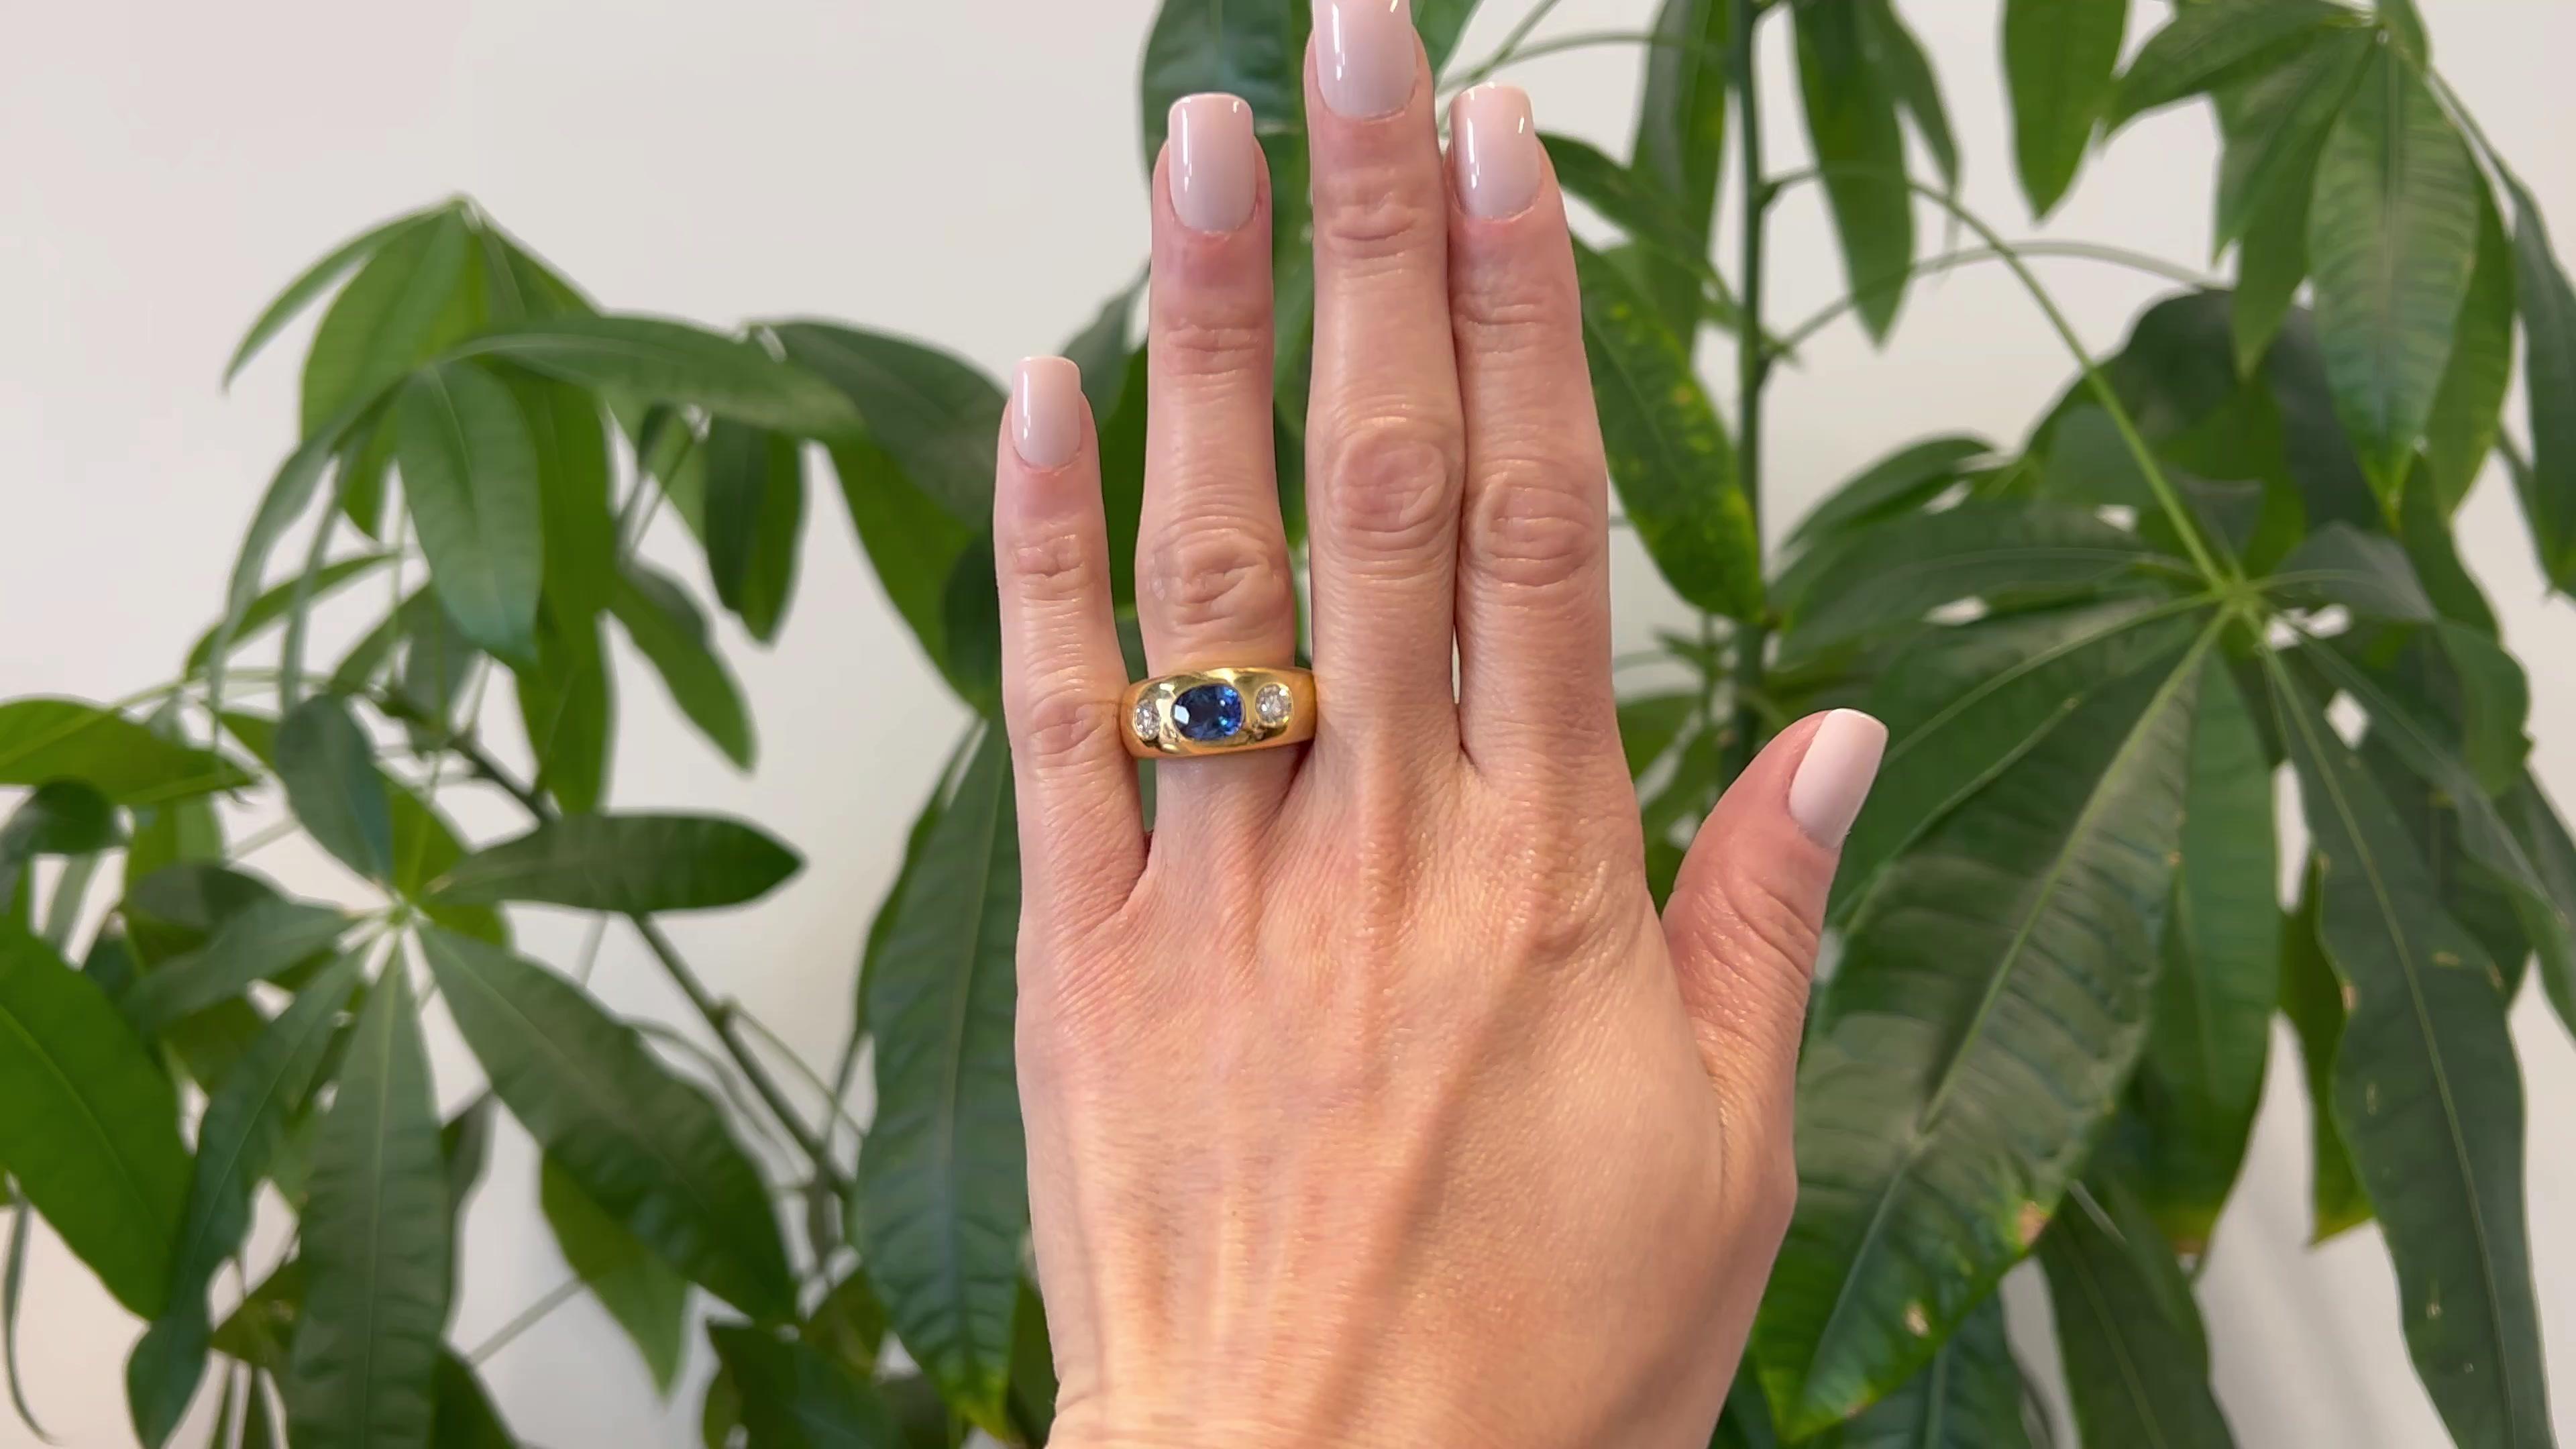 One Vintage Sapphire and Diamond 18k Yellow Gold Three Stone Ring. Featuring one cushion cut sapphire weighing approximately 1.75 carats. Accented by two round brilliant cut diamonds with a total weight of approximately 0.85 carat, graded F color,